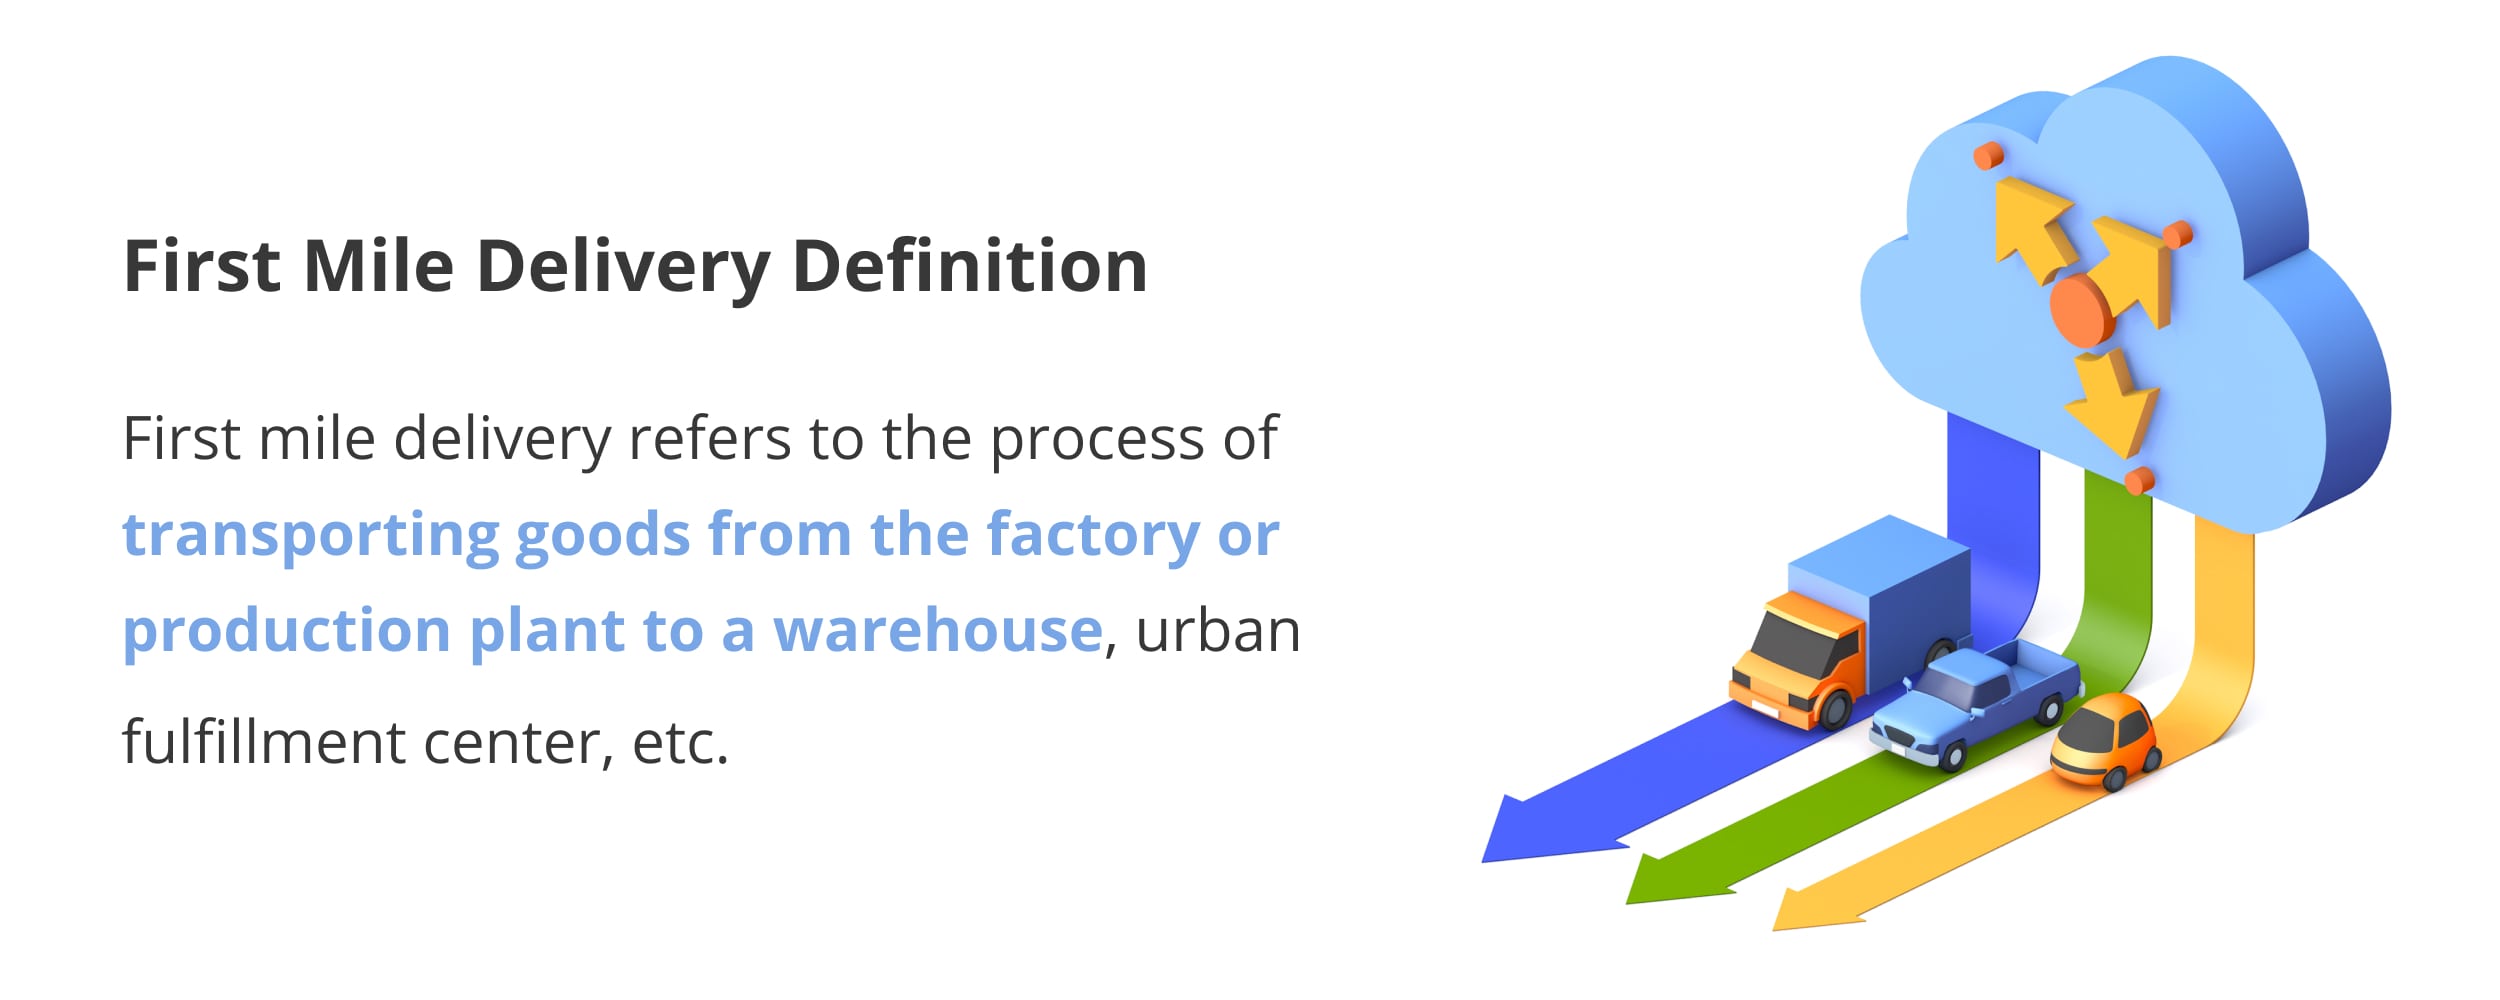 The first mile delivery definition - explained.